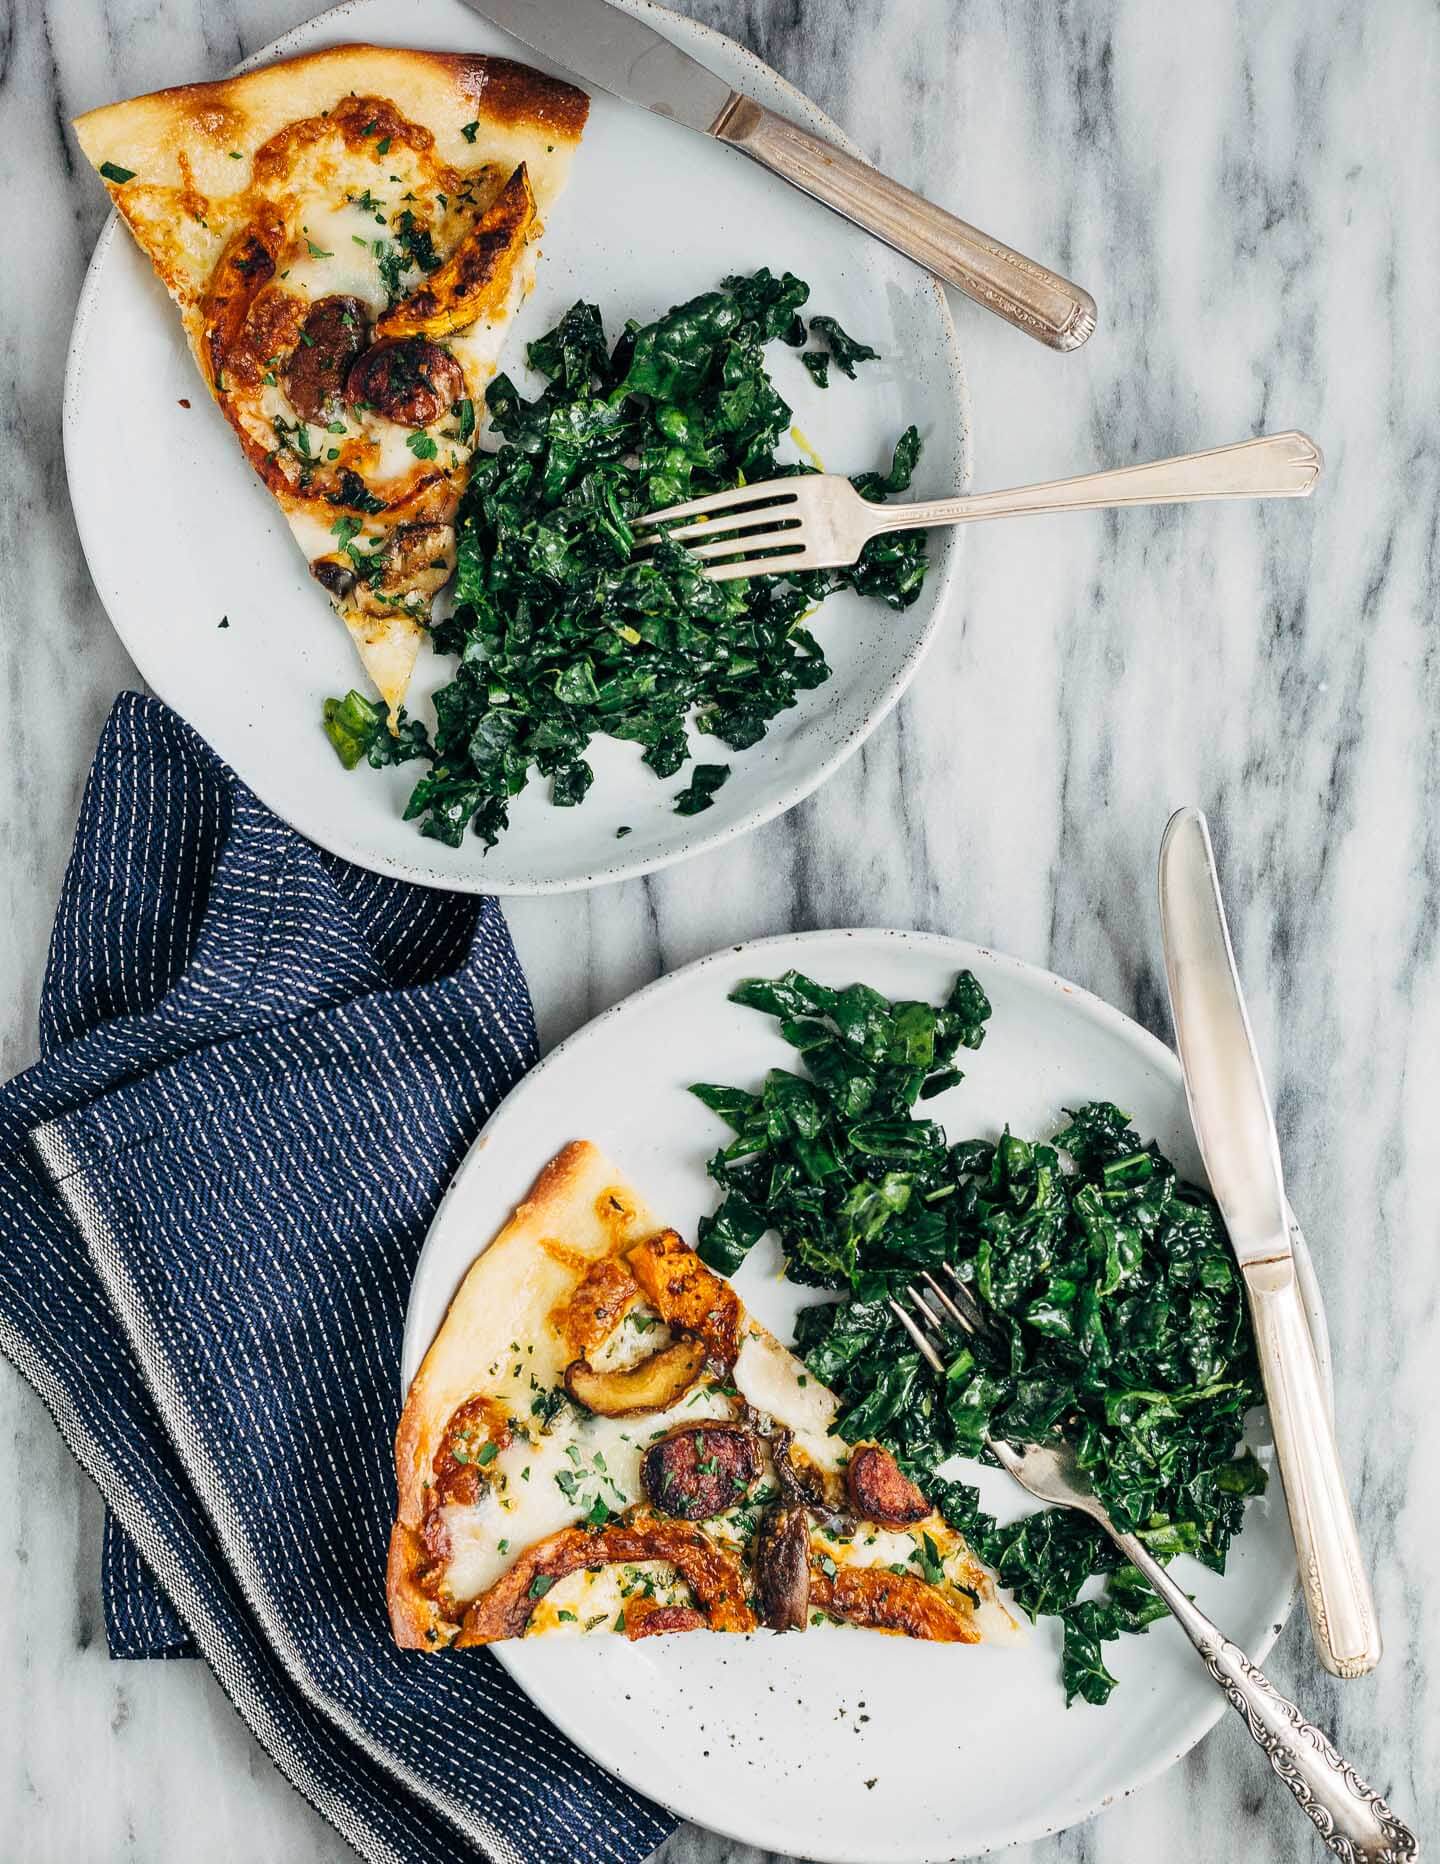 A simple fall meal featuring butternut squash and sausage pizza and a simple kale salad.